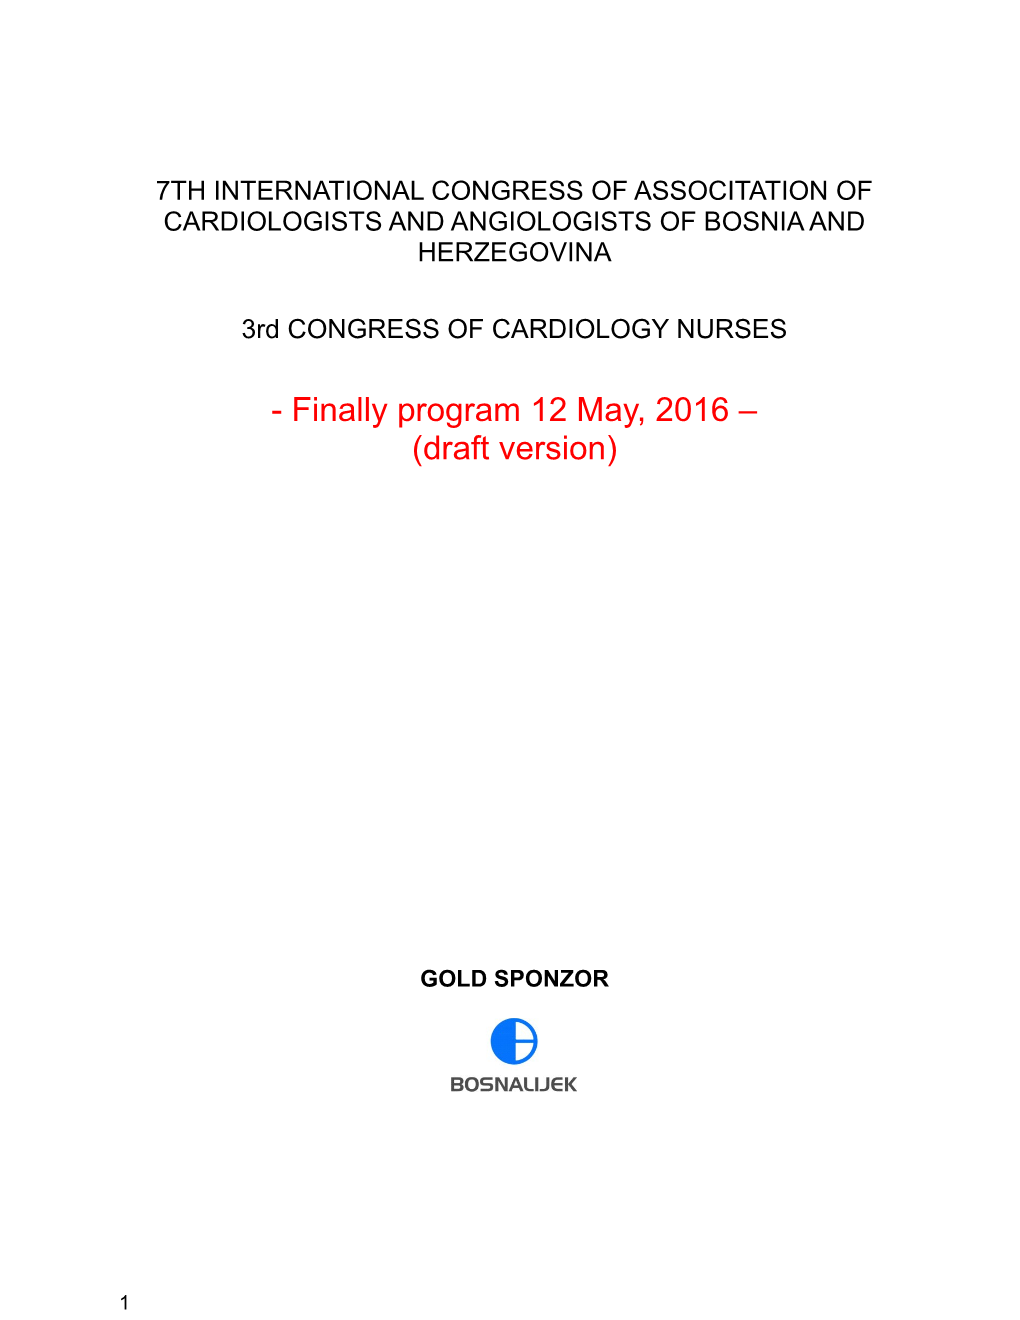 7Th International Congress of Associtation of Cardiologists and Angiologists of Bosnia